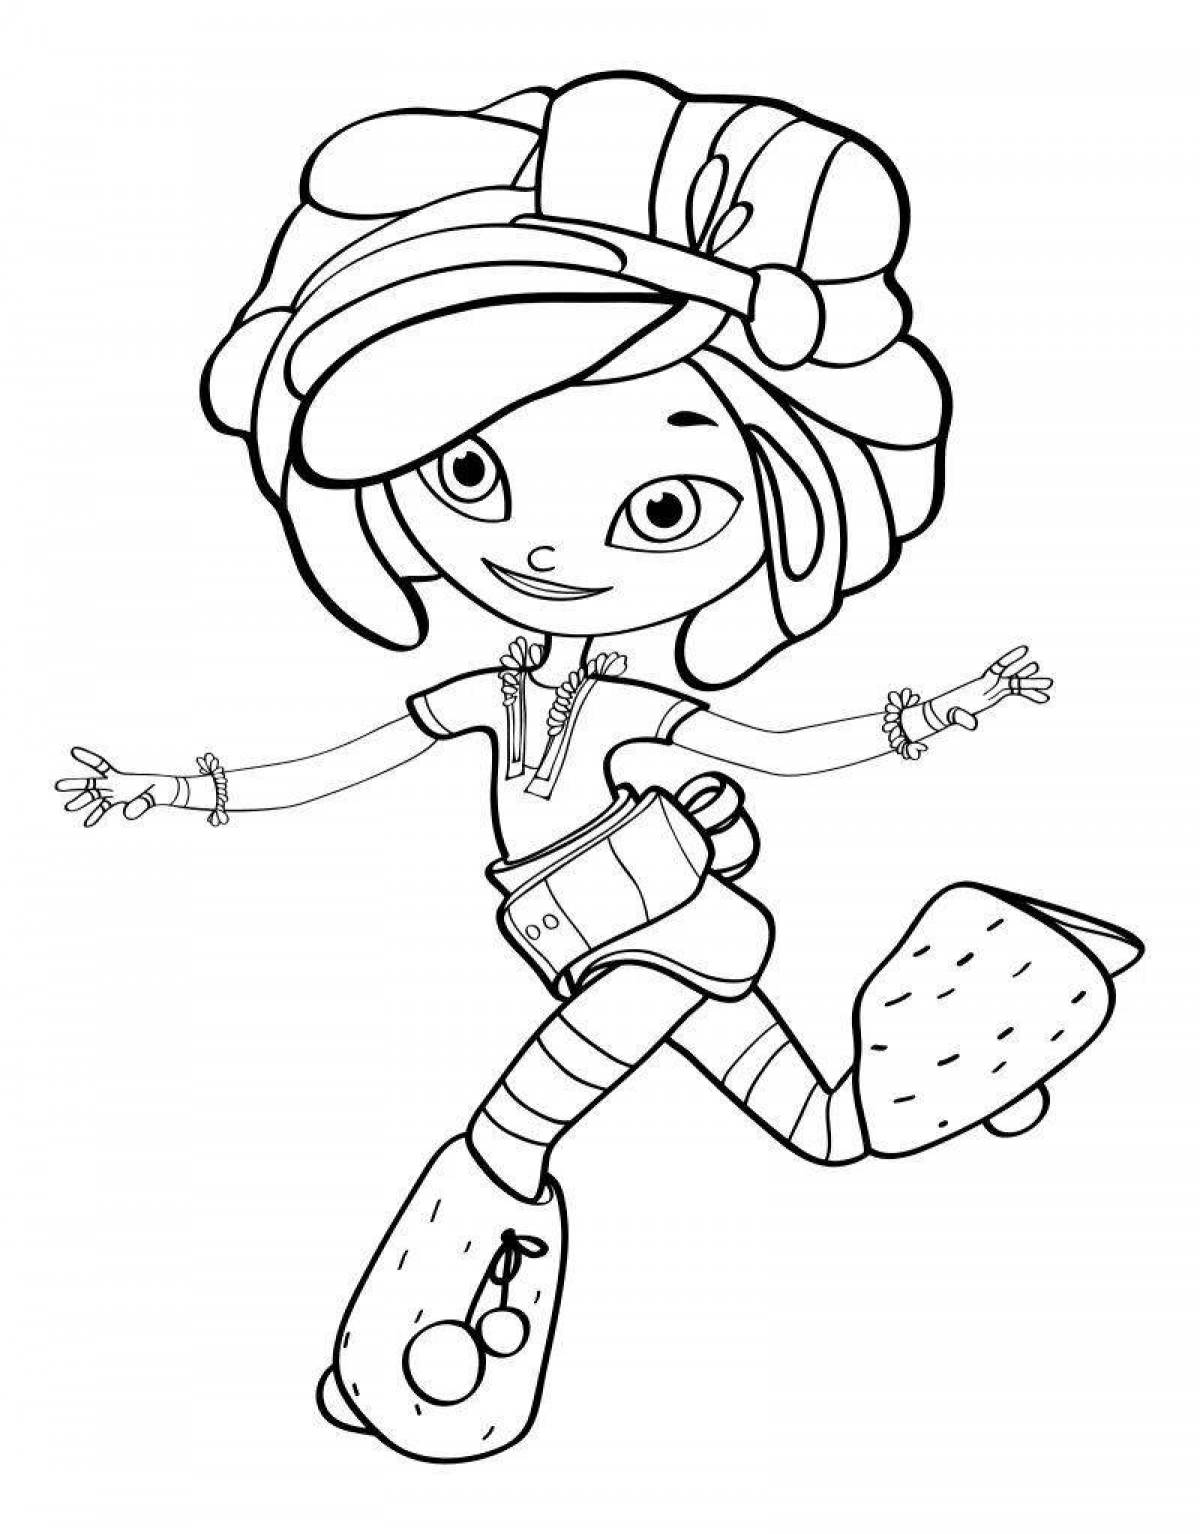 Incredible coloring page turn on fairy patrol